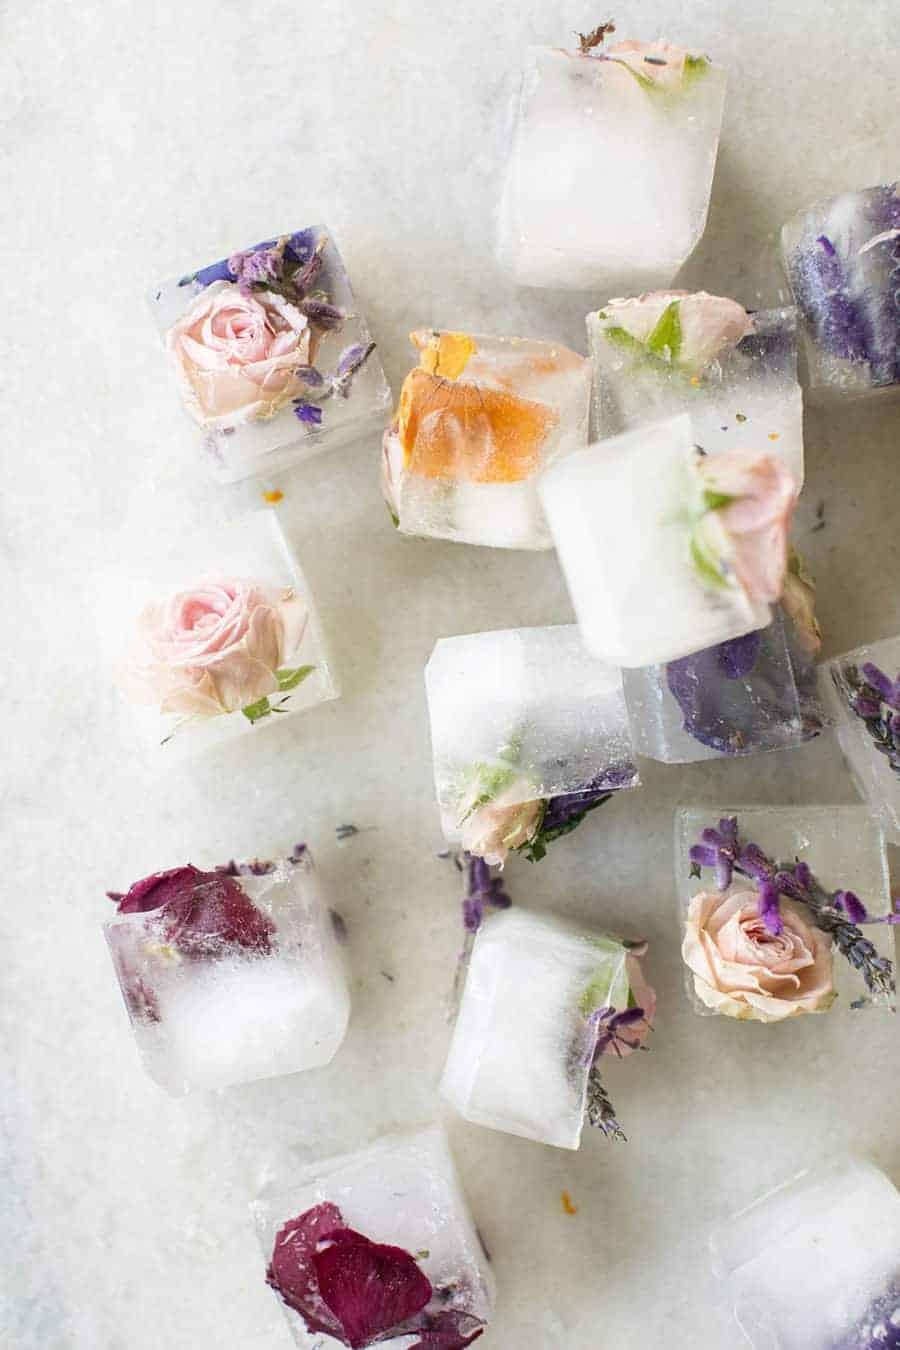 Ice cubes with colorful flowers.